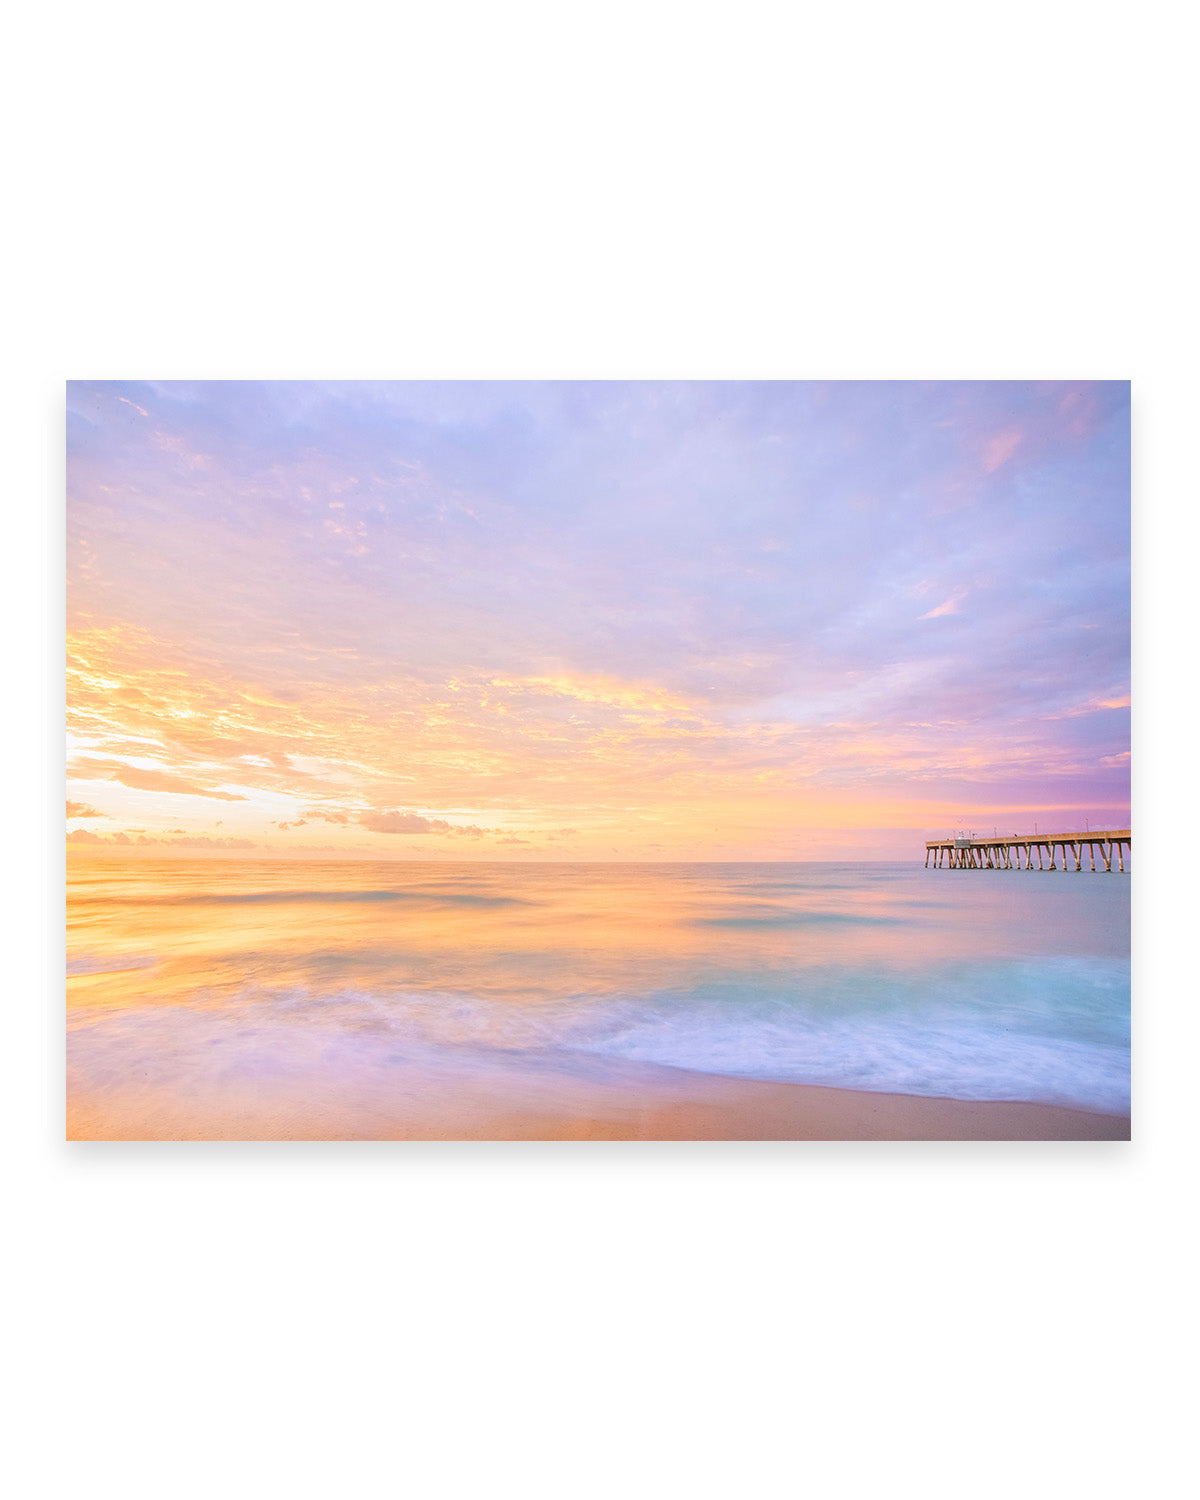 colorful pastel purple and blue sunrise Wrightsville beach photograph by Wright and Roam